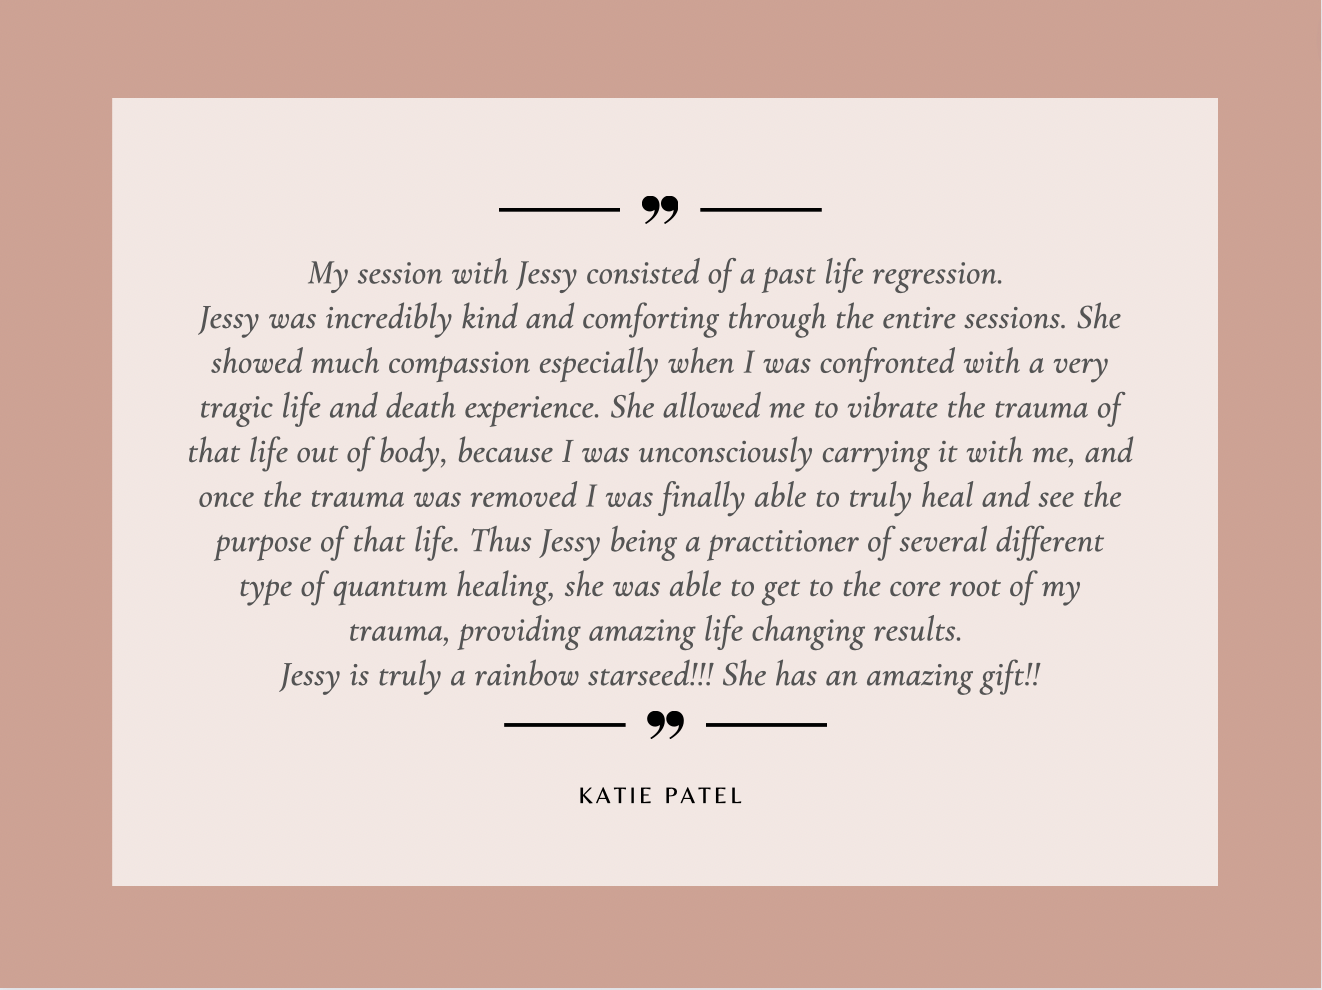 Katie Patel in Eagle River, Anchorage, Alaska shares her Past Life Regression session provided by Jessy Furniel, Quantum Energy Healer in Anchorage, Alaska